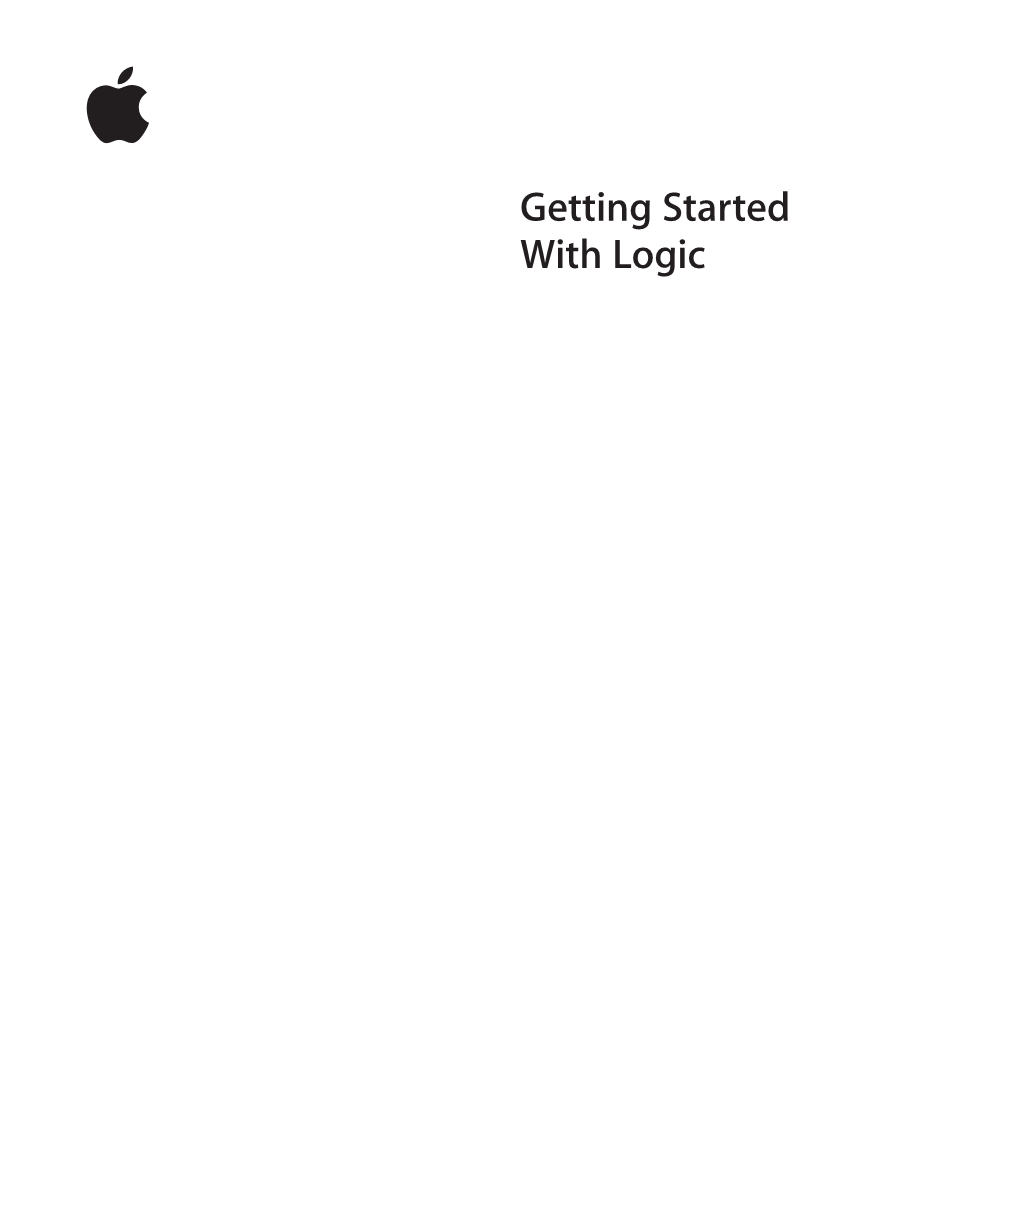 Getting Started with Logic